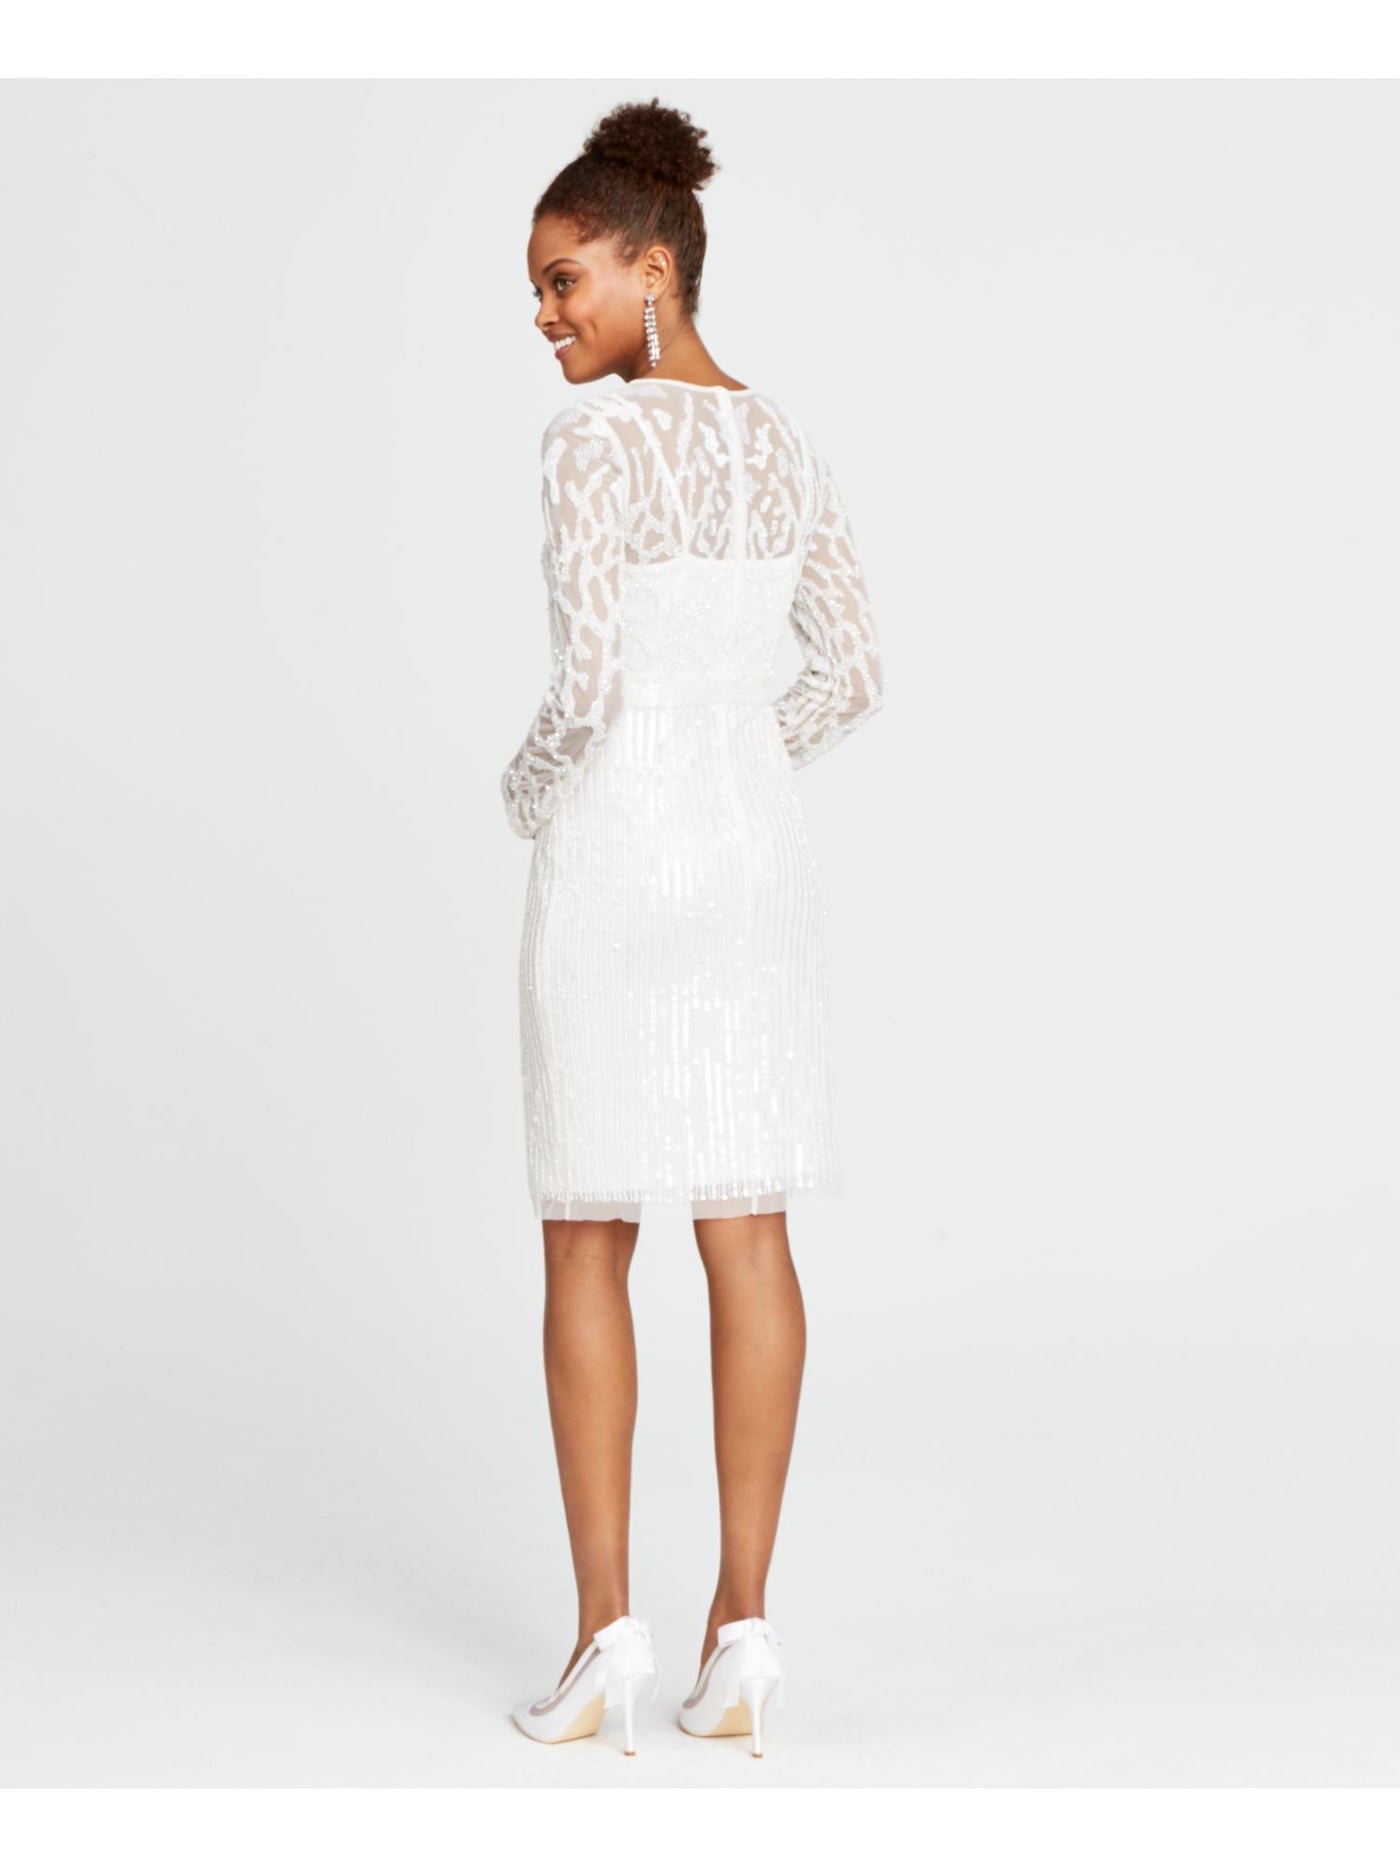 ADRIANNA PAPELL Womens White Beaded Sequined Zippered Printed Long Sleeve Illusion Neckline Above The Knee Formal Sheath Dress 6